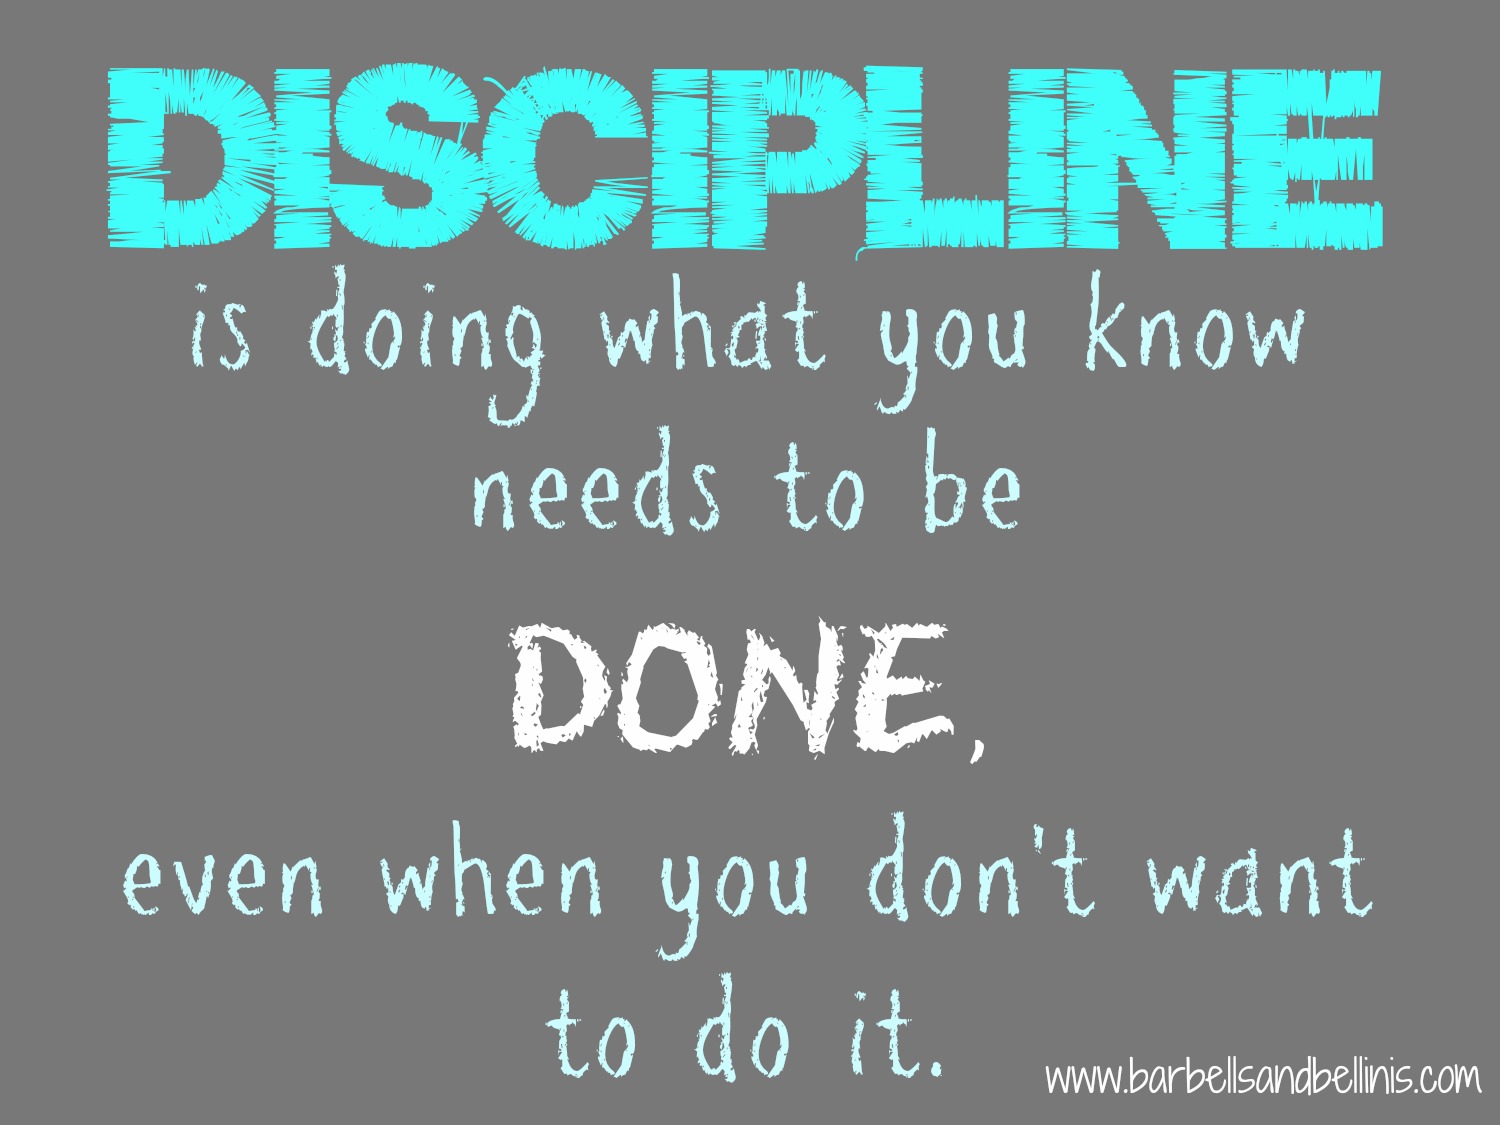 Discipline is doing what you know needs to be done, even if you don't want to do it.